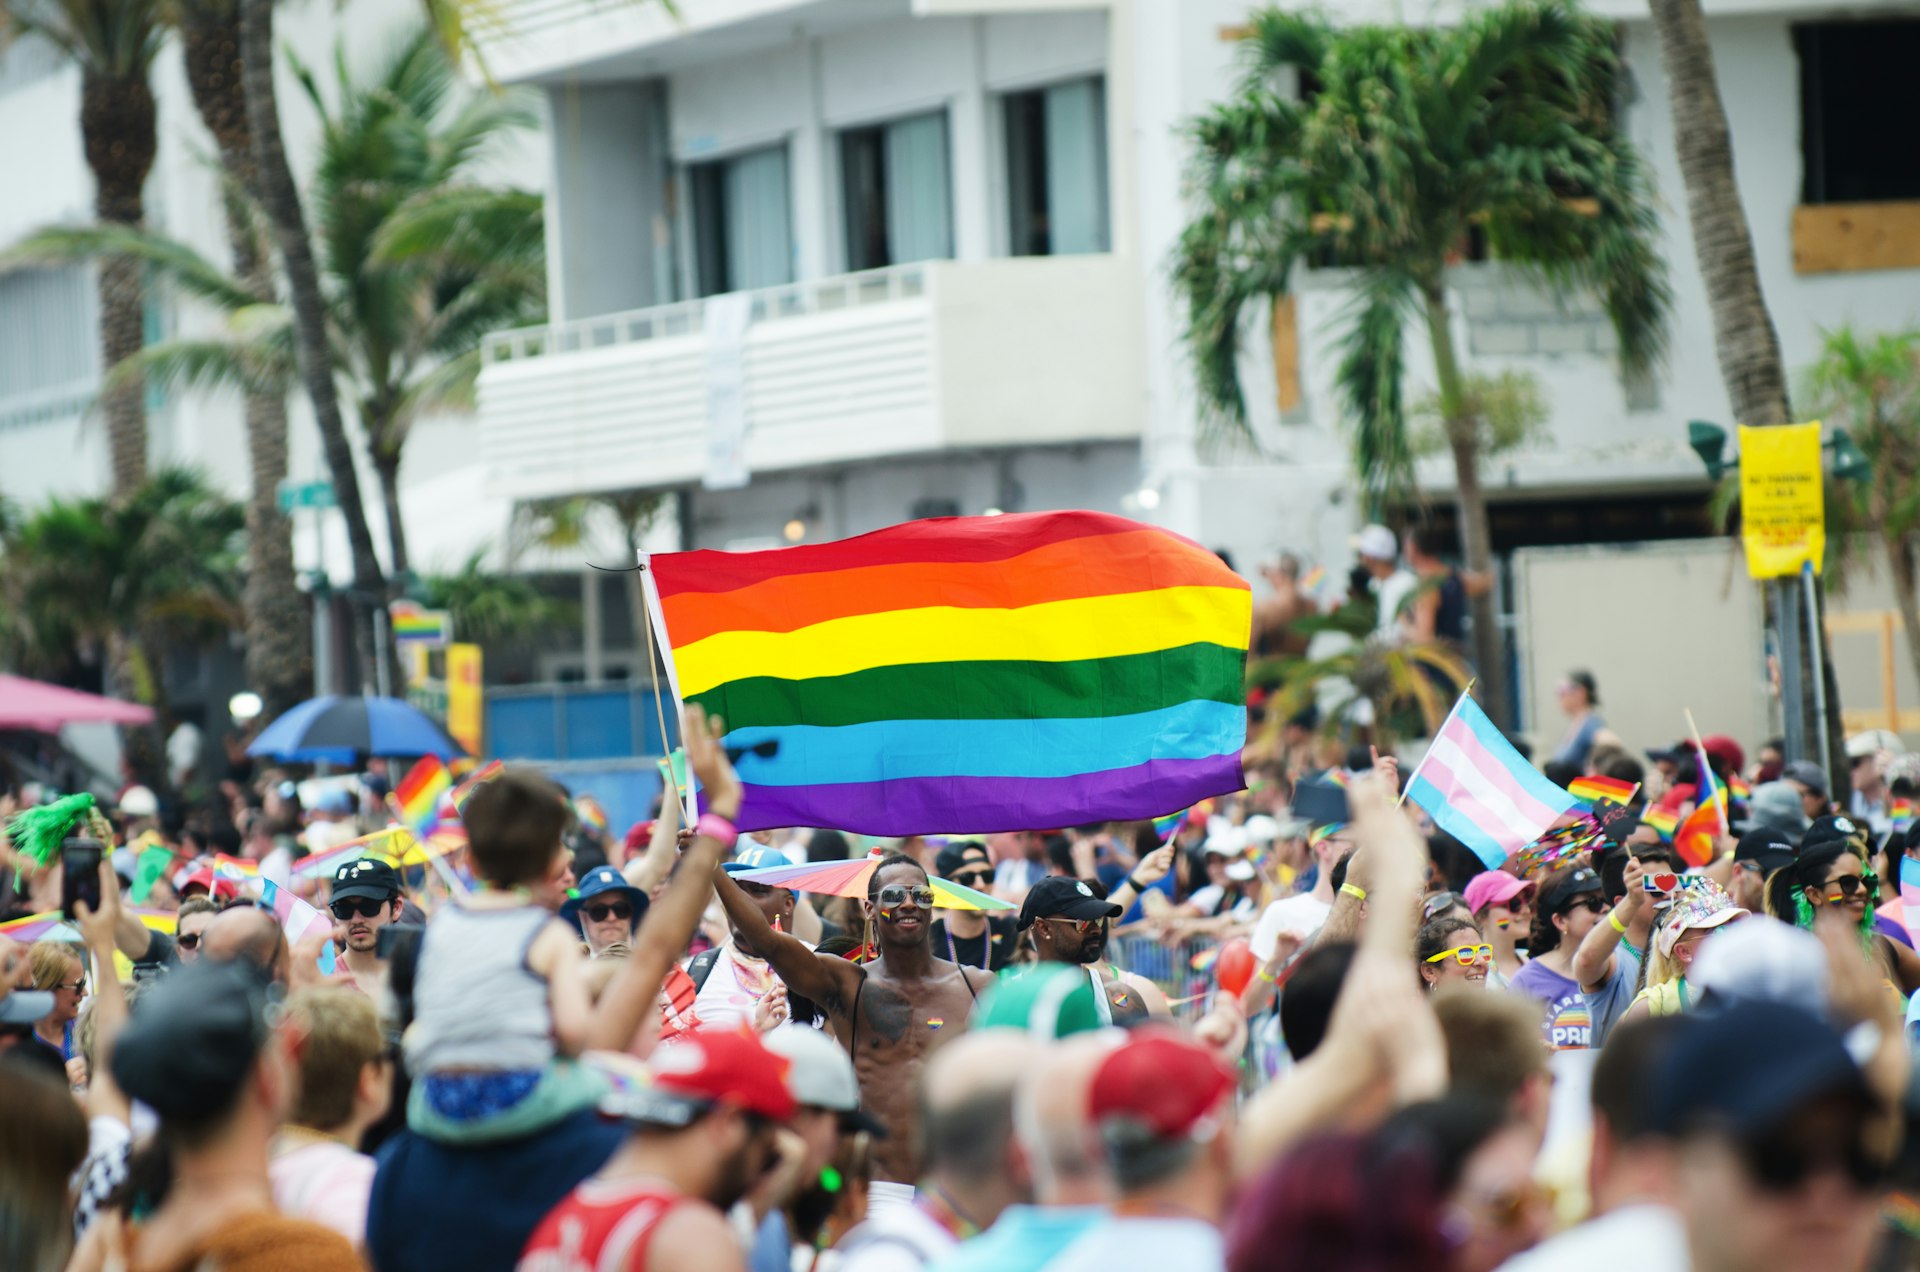 A huge crowd of people waving Pride flags cheer participants walking in the annual Miami Beach Pride Parade on Ocean Drive in South Beach.